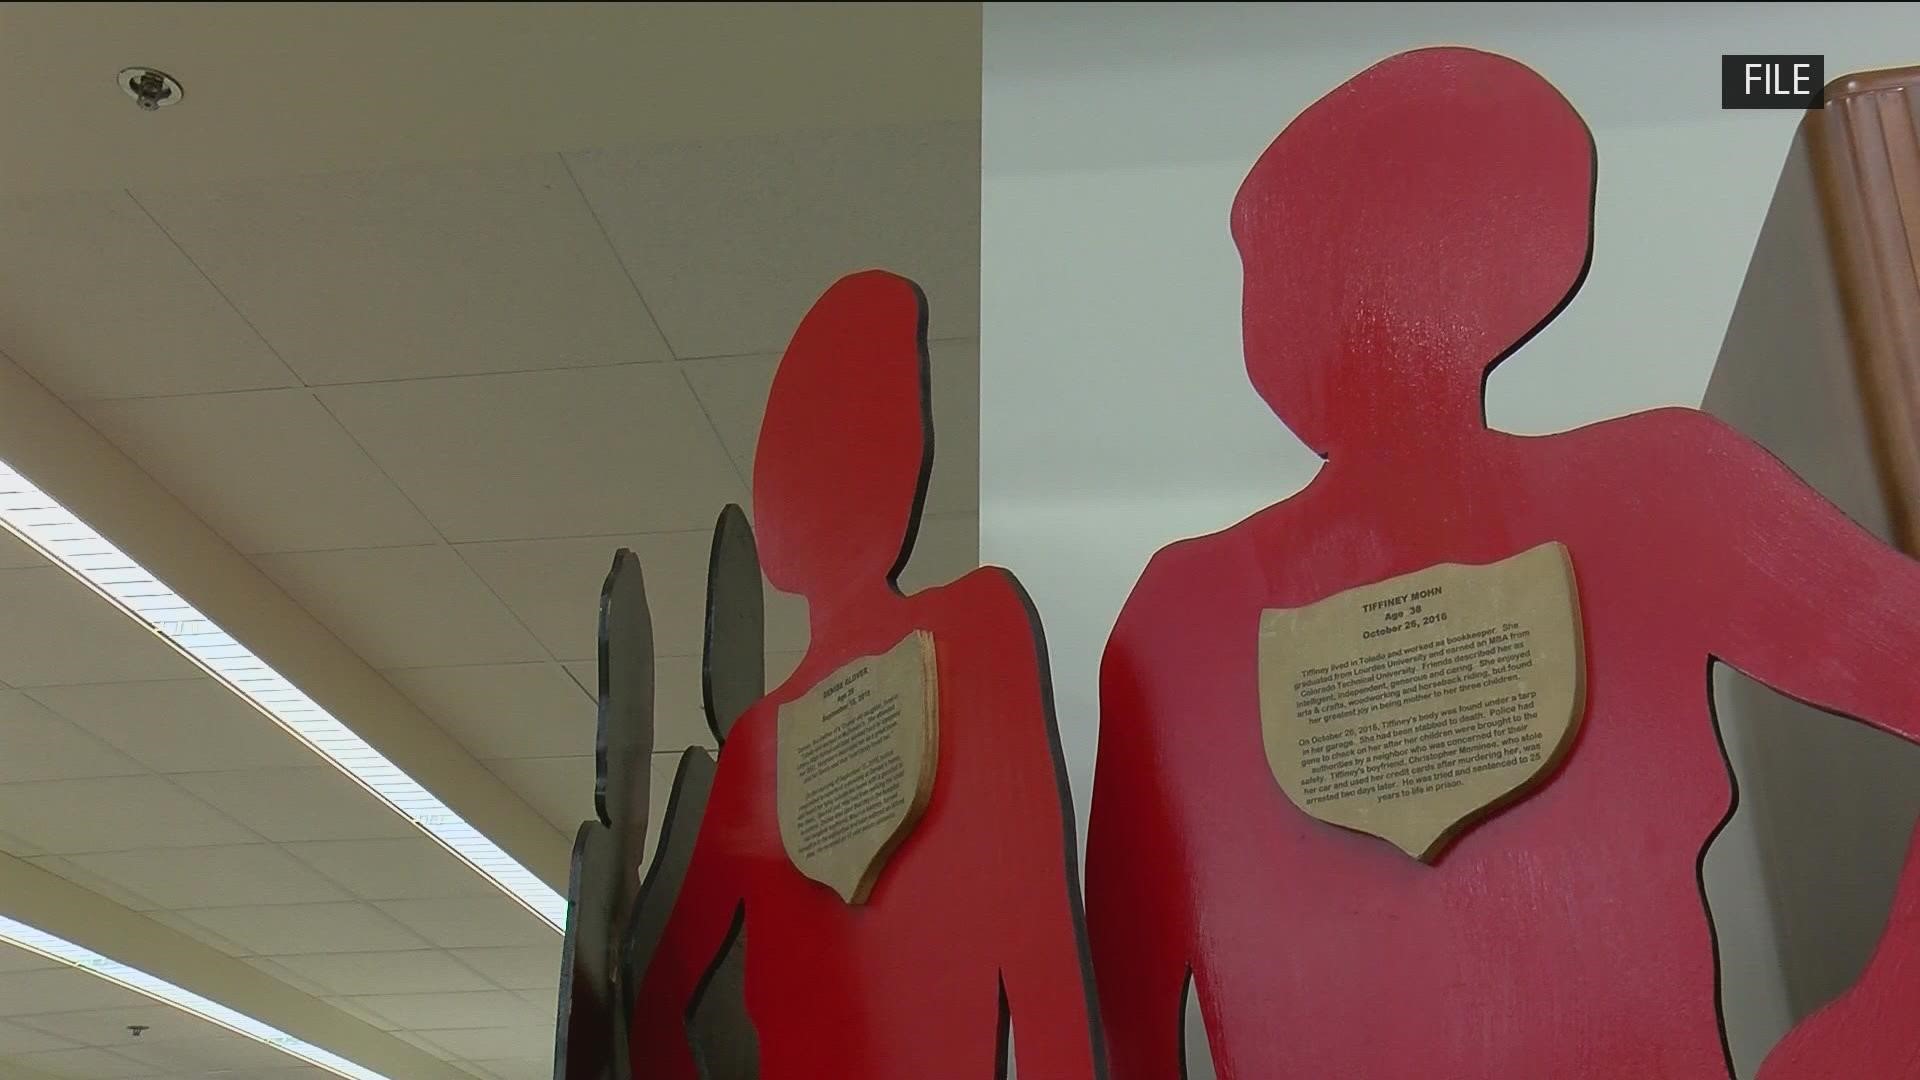 Seven of Toledo's 46 homicides this year have been domestic violence situations. The Bethany House's project at the downtown library brings awareness.